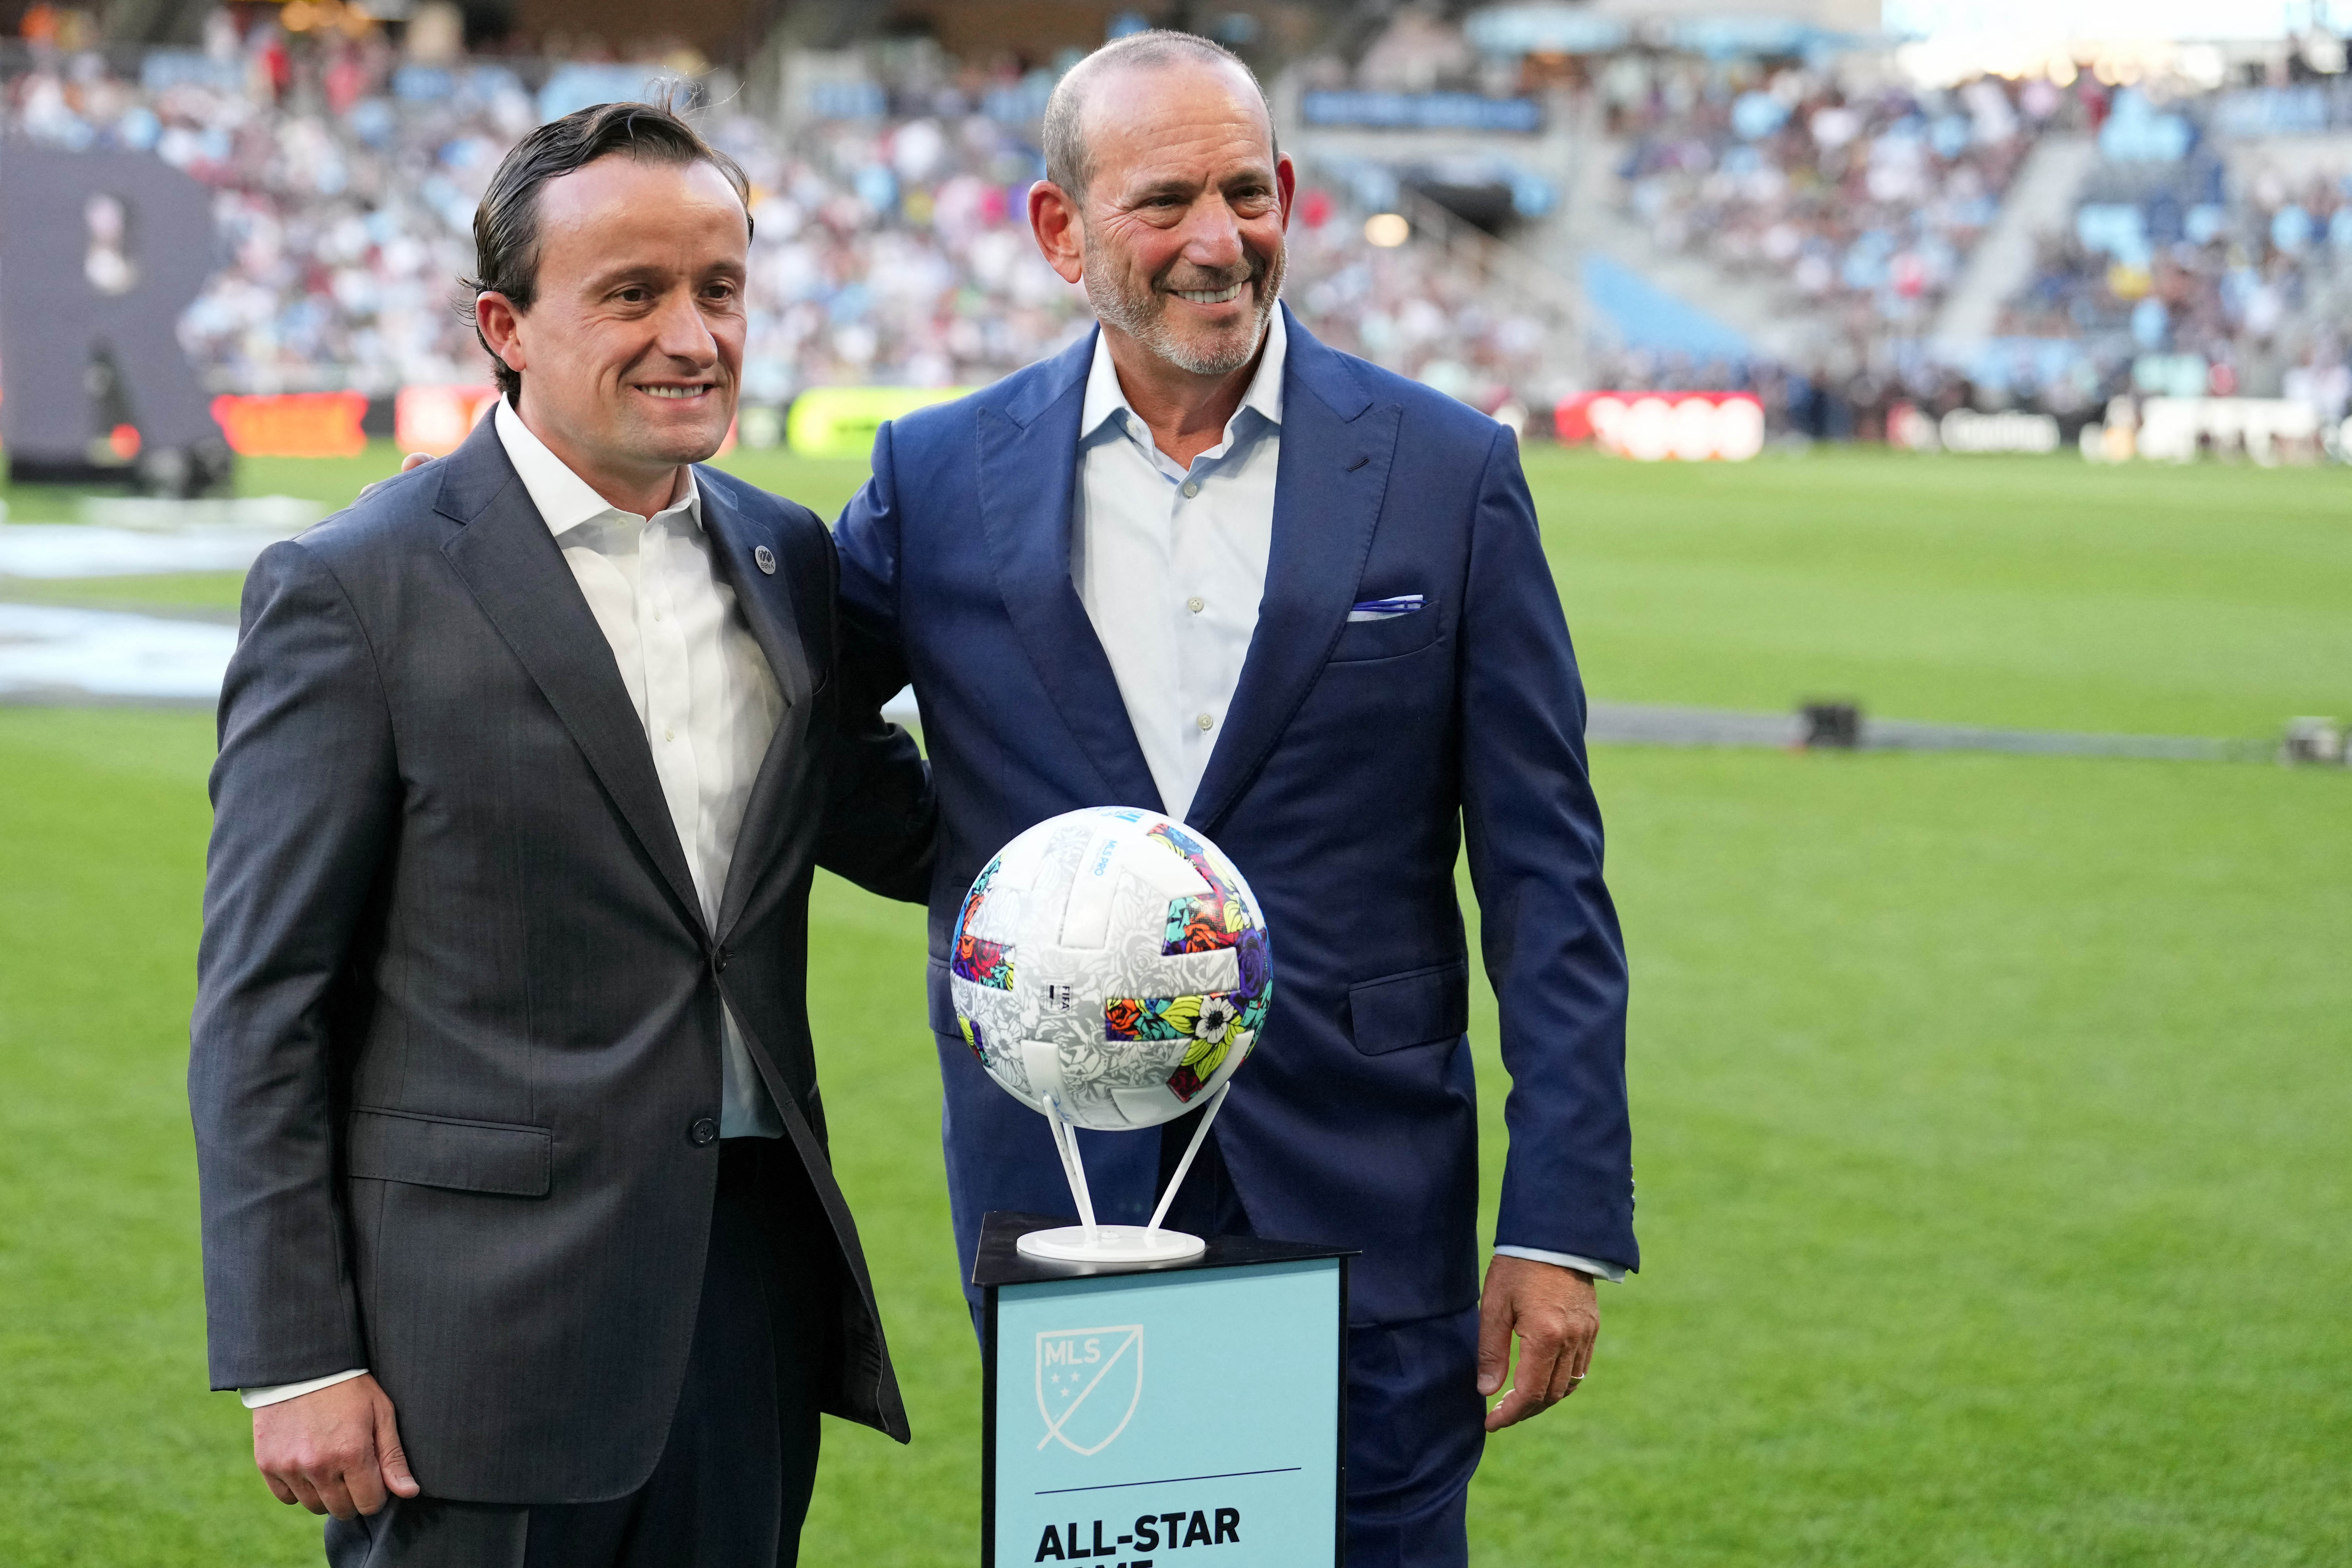 Aug 10, 2022; Saint Paul, MN, USA; Liga MX president Mikel Arriola (left) and MLS commissioner Don Garber (right) pose for a photo before the 2022 MLS All-Star Game at Allianz Field. Mandatory Credit: Brace Hemmelgarn-USA TODAY Sports